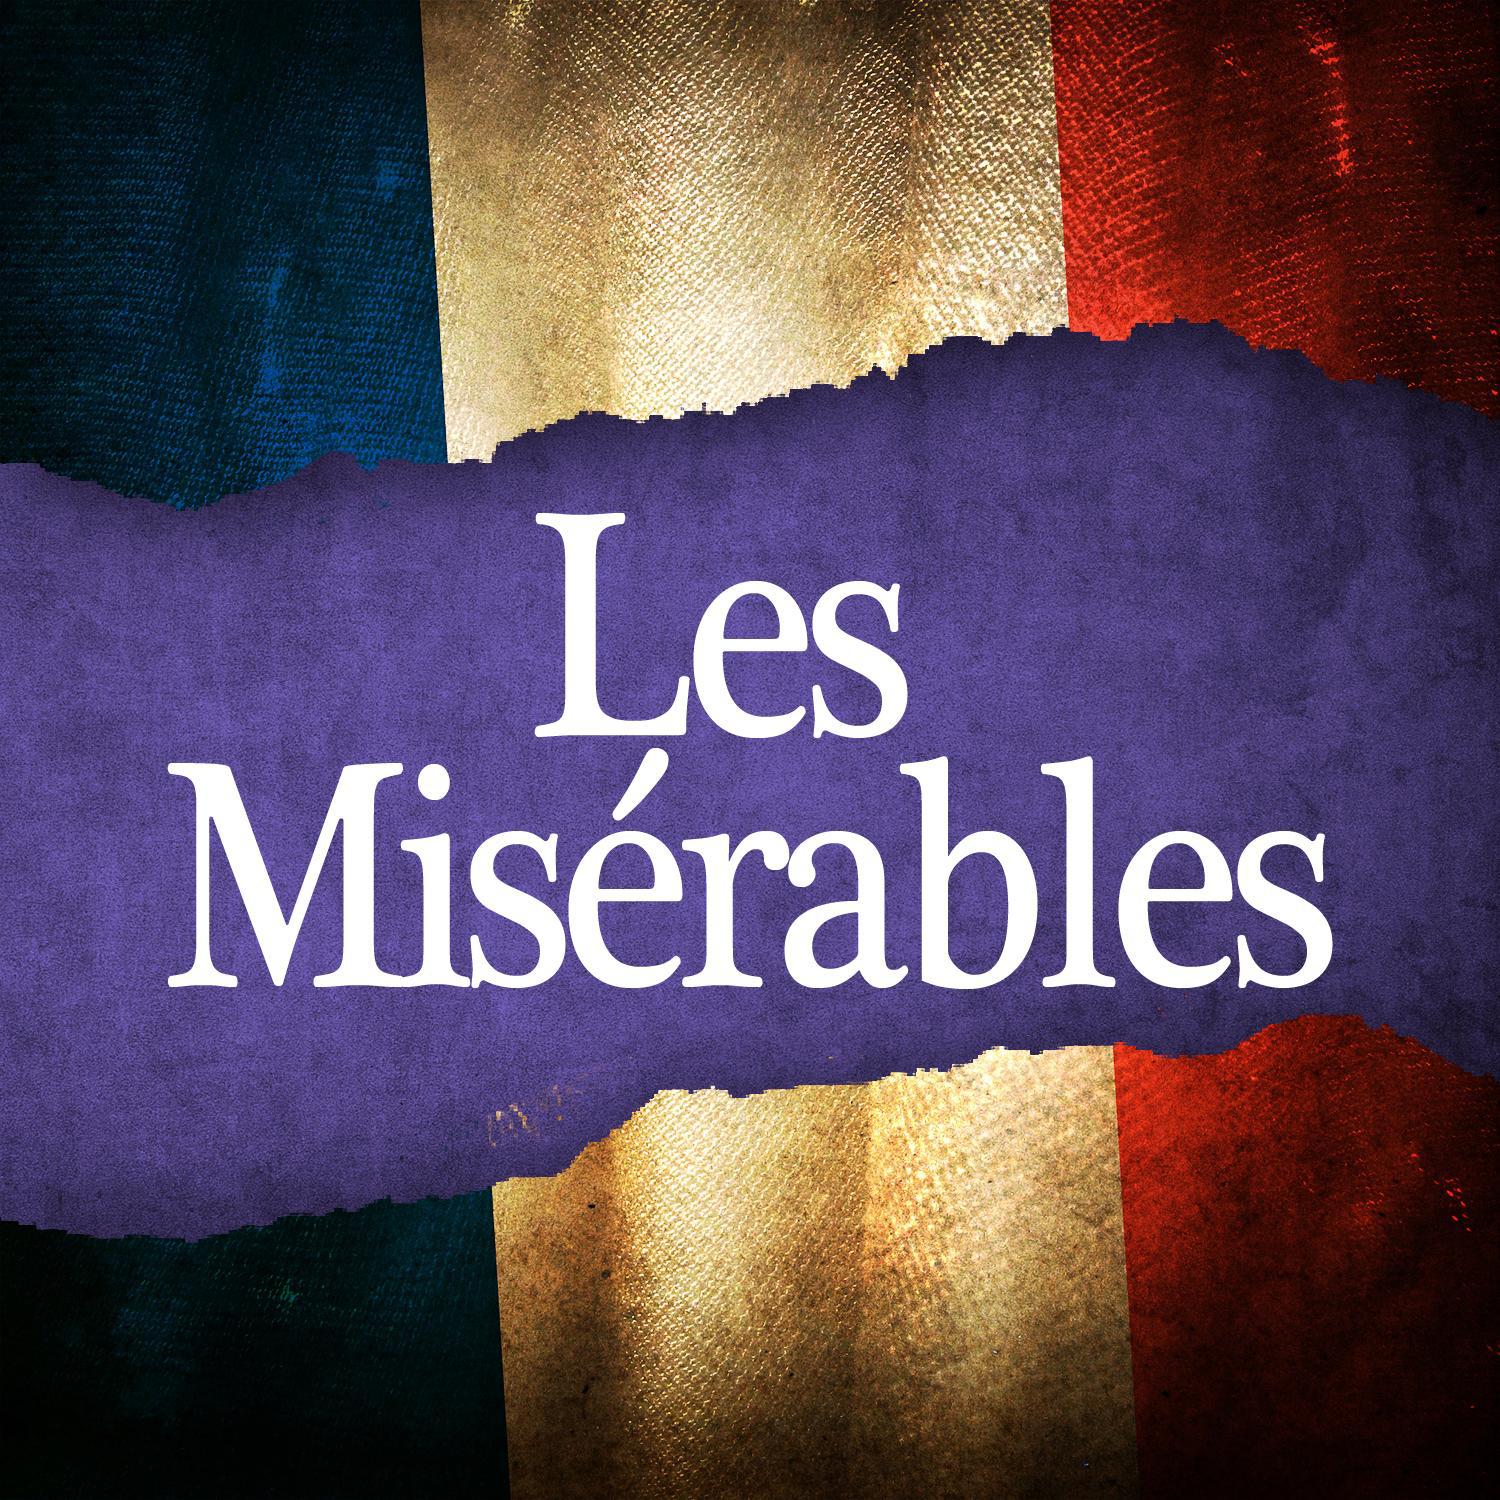 Les Mise rables Highlights from the Musical